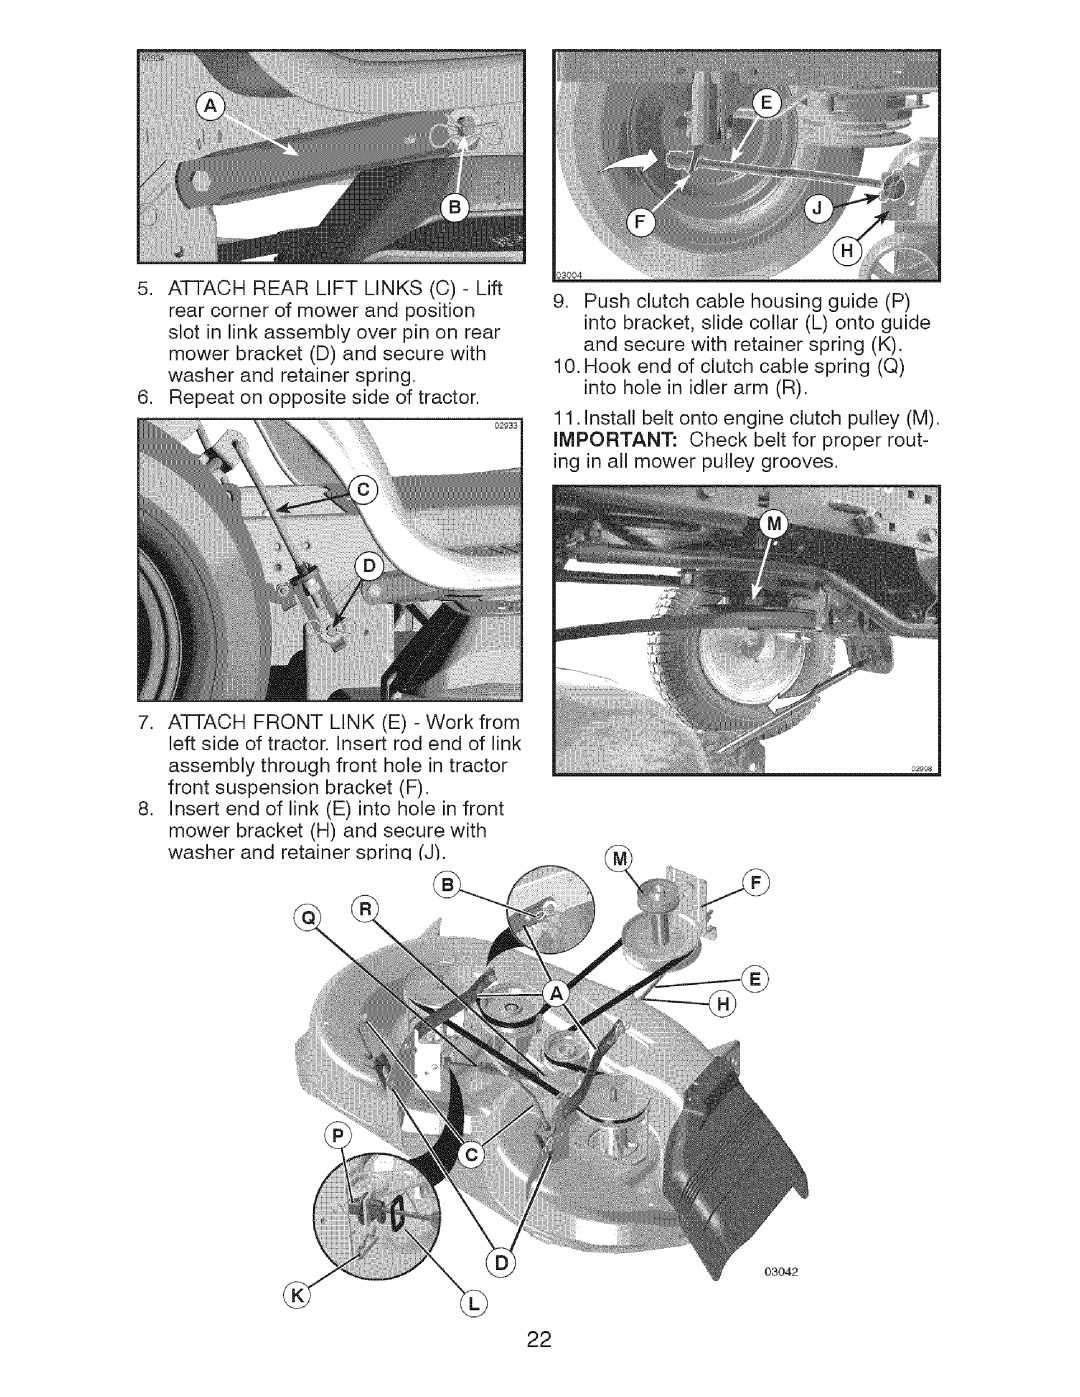 Craftsman 917.28726 owner manual Repeat on opposite side of tractor 